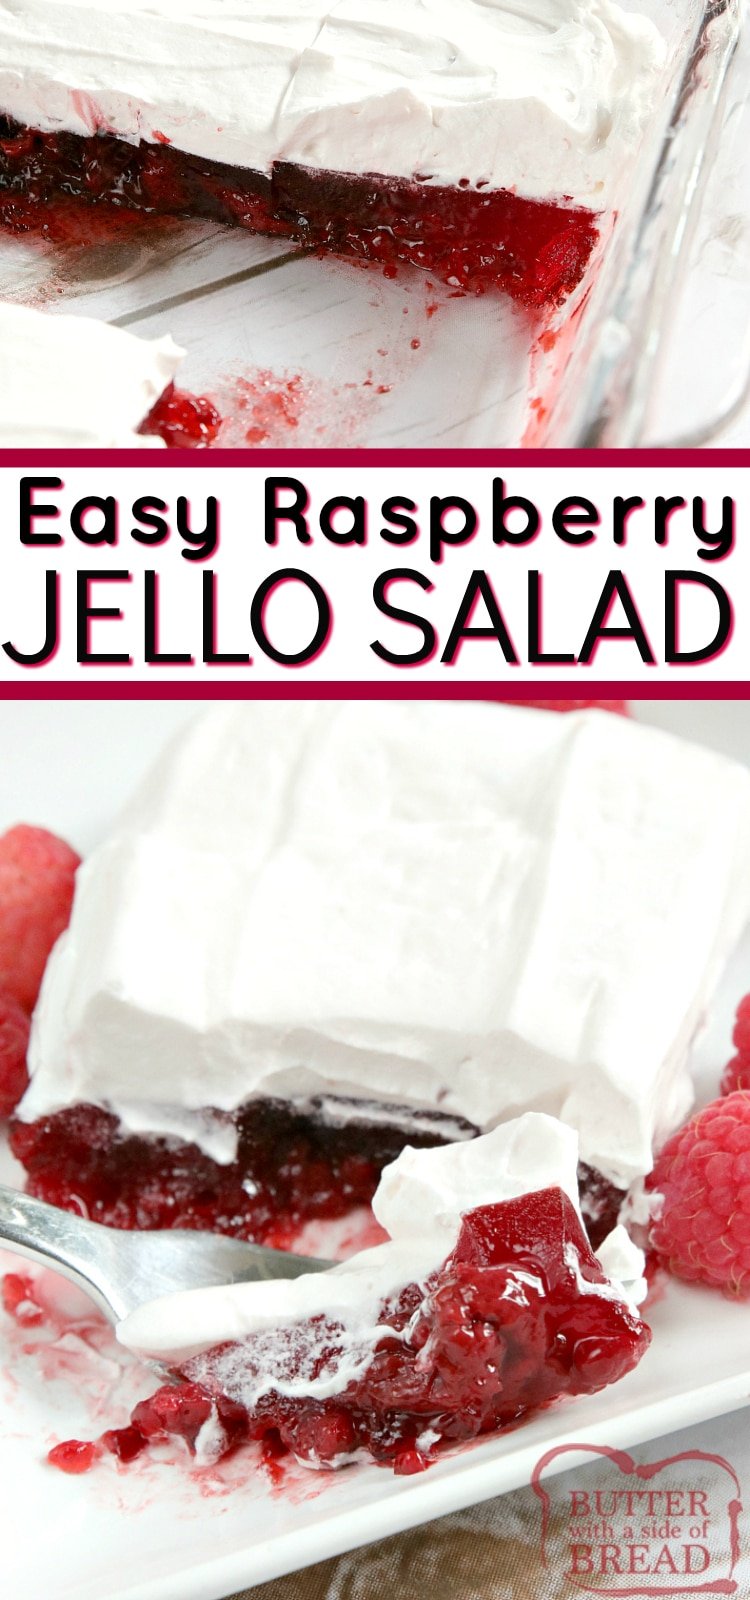 Easy Raspberry Jello Salad is made with raspberry pie filling and jello and then is topped with a creamy raspberry layer. Only four ingredients for an easy jello recipe that works as a side dish or a dessert!